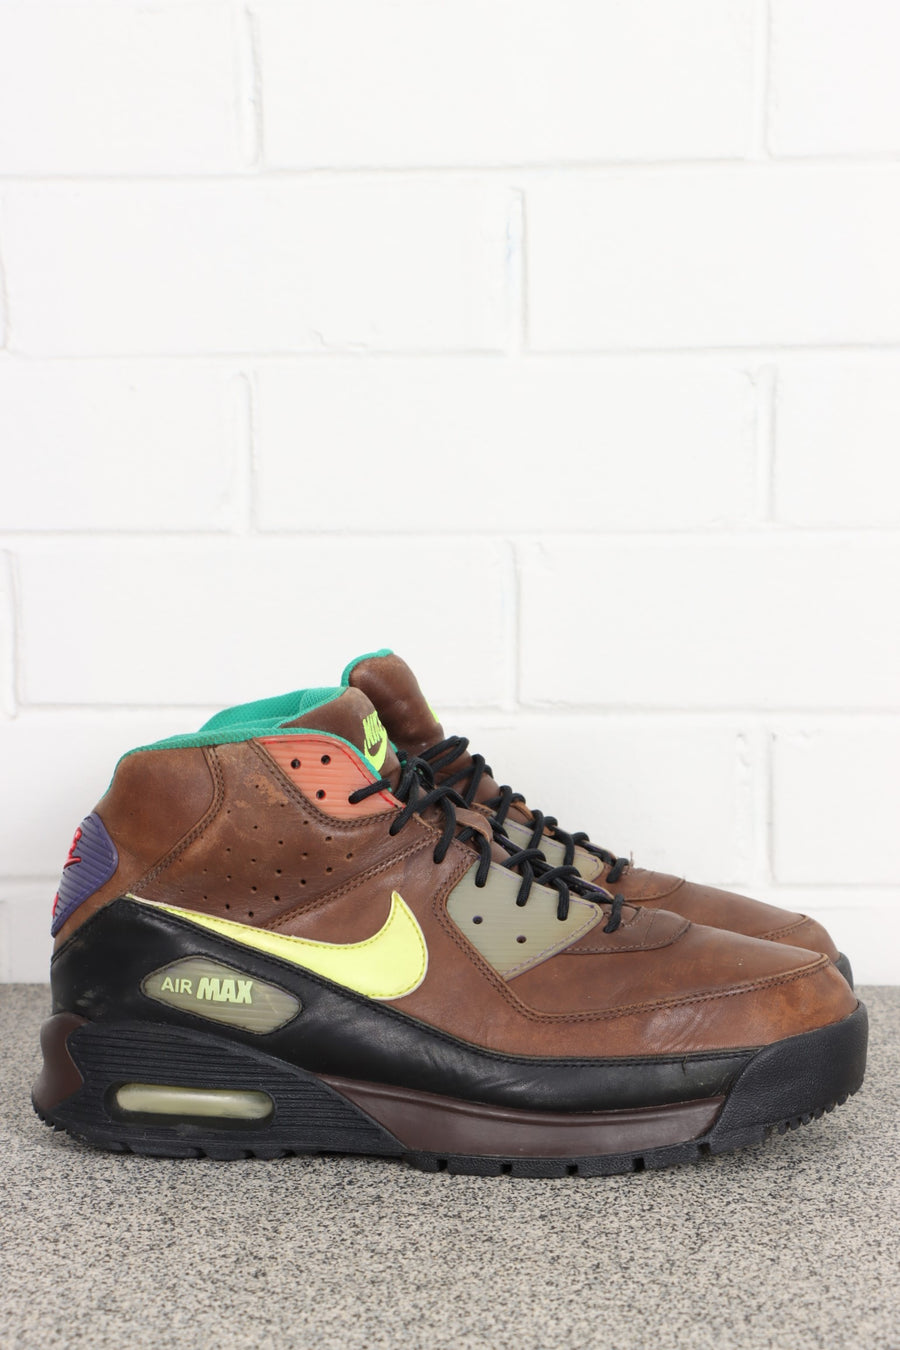 NIKE Air Max 90 Brown Leather Sneaker Boots (11.5)